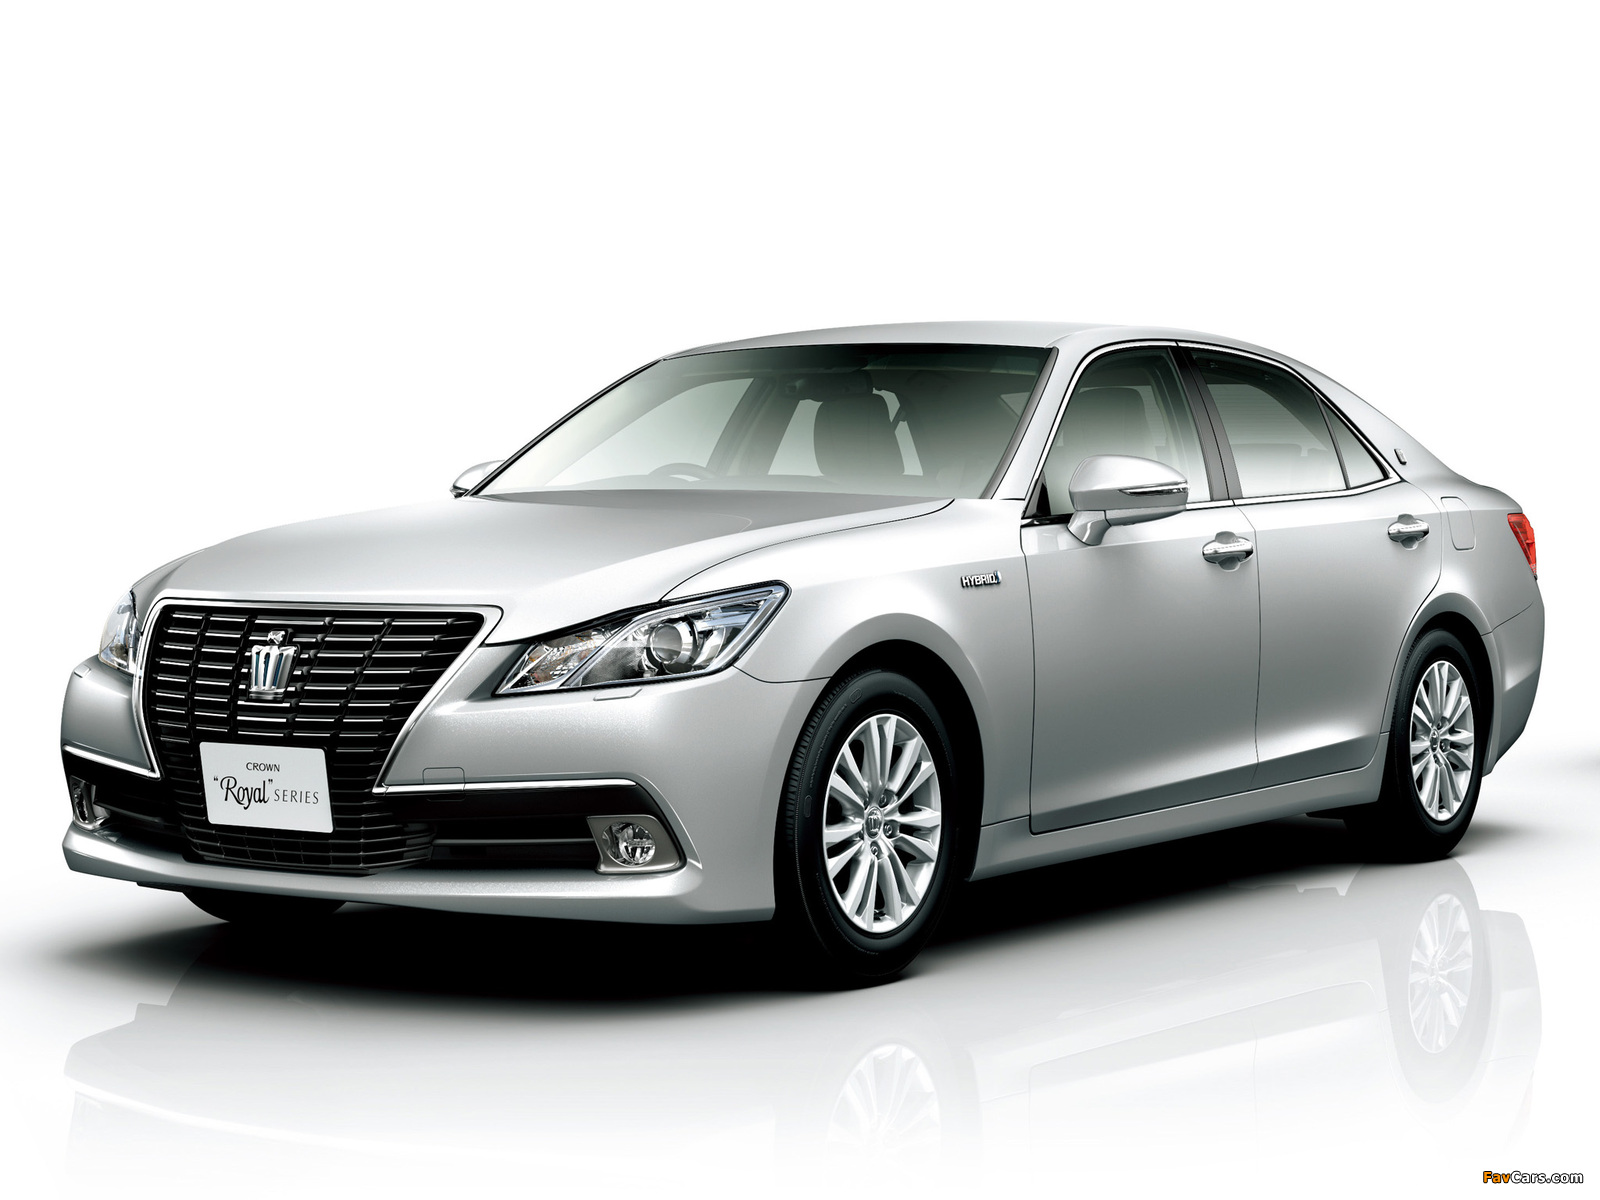 Toyota Crown Hybrid Royal Saloon (S210) 2012 images (1600 x 1200)